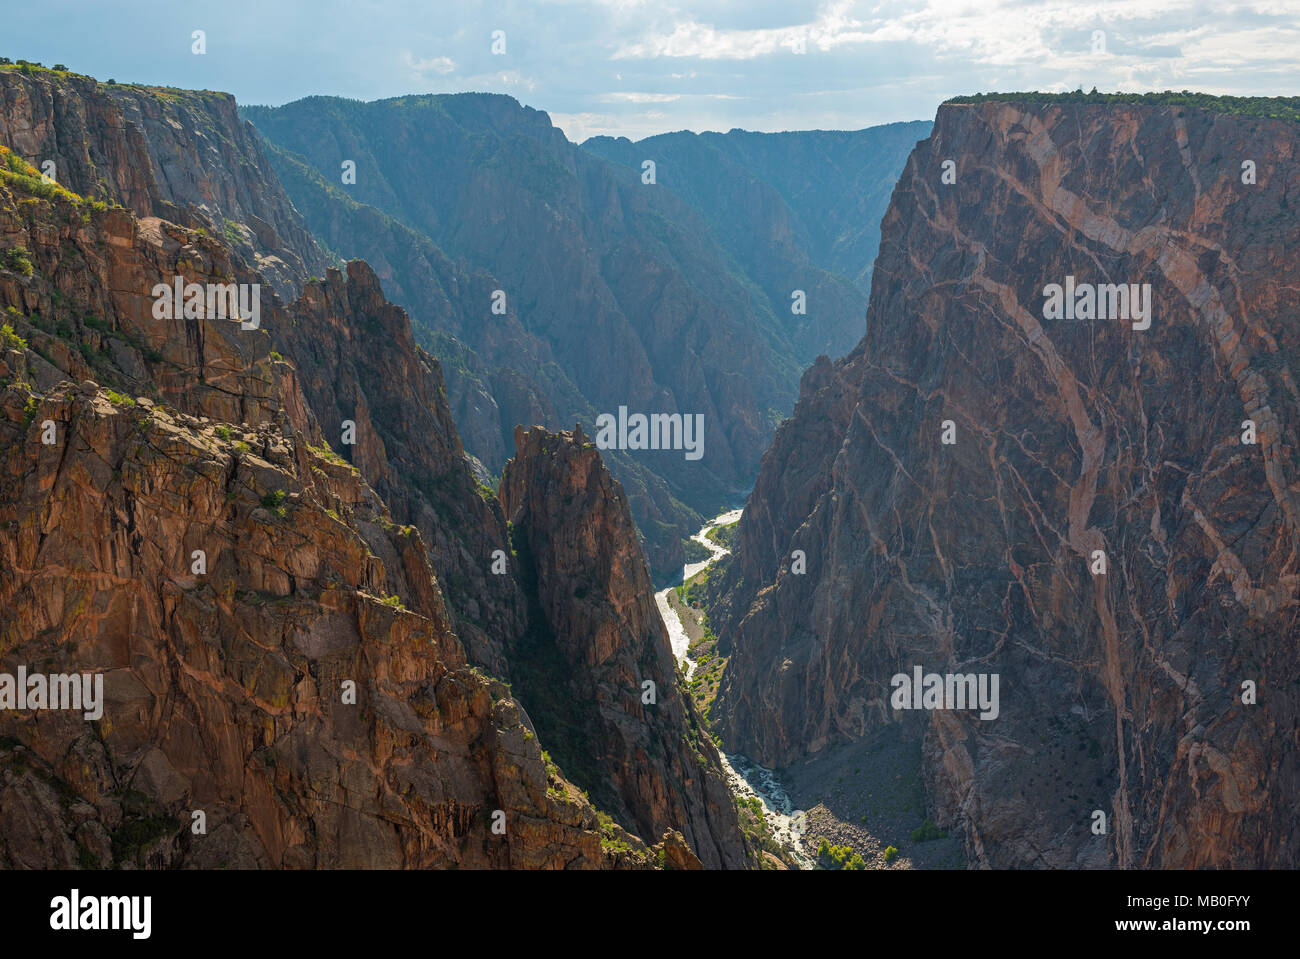 Landscape photograph of the Black Canyon of the Gunnison with the Gunnison river cutting through the dark granite rock formation, Colorado, USA. Stock Photo